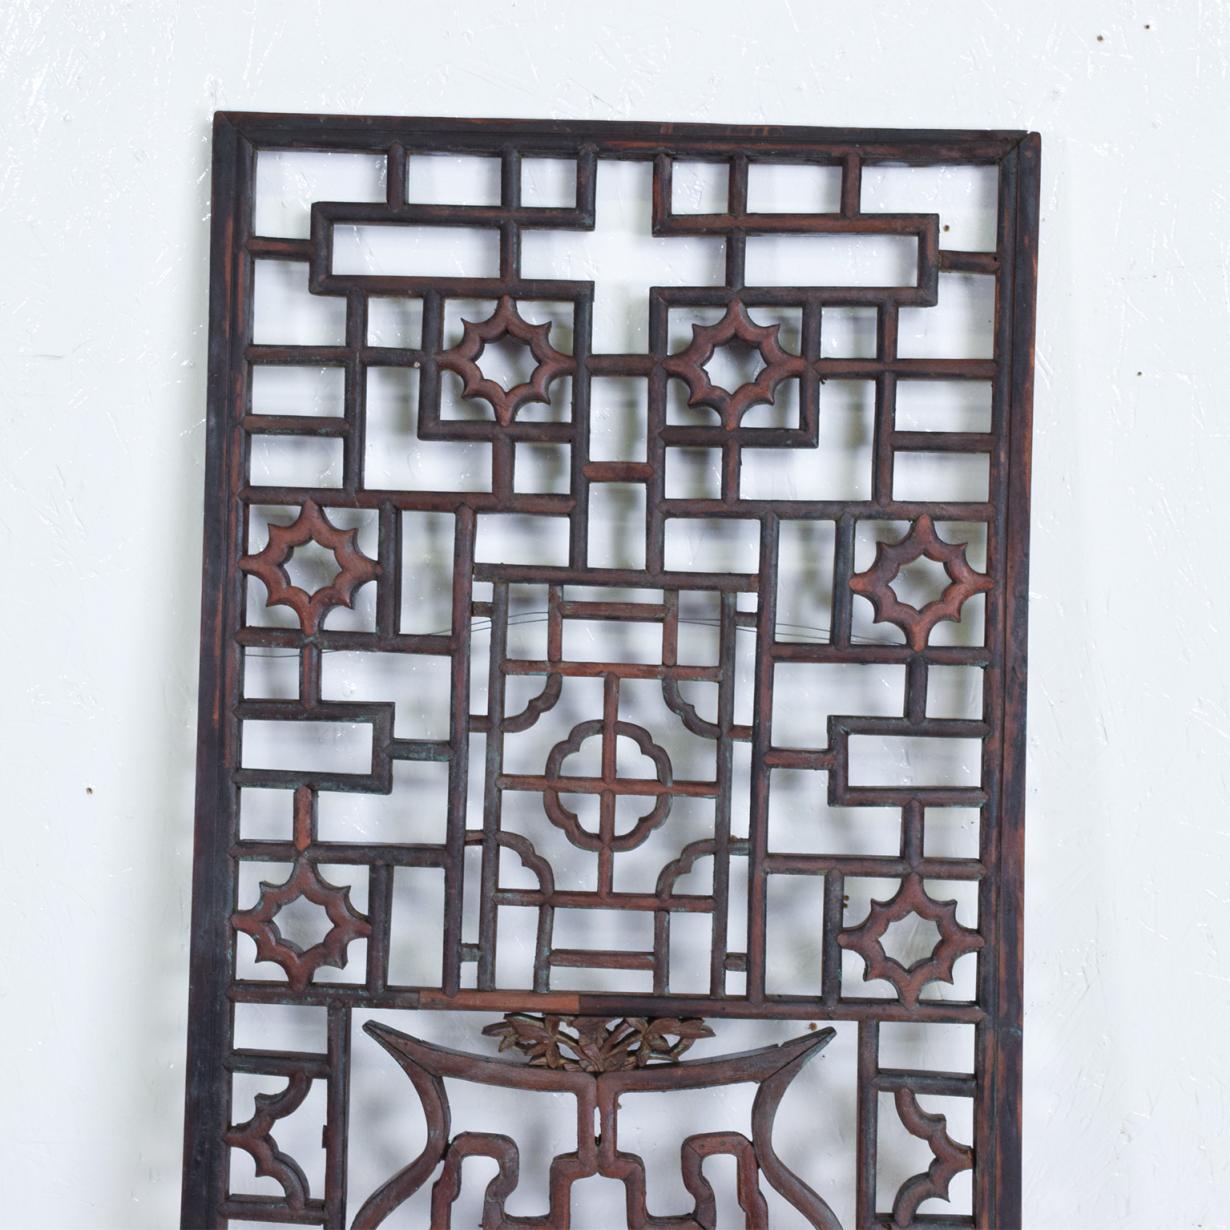 Anglo-Japanese Oriental Asian Rosewood Wall Sculptural Antique Panel Screen